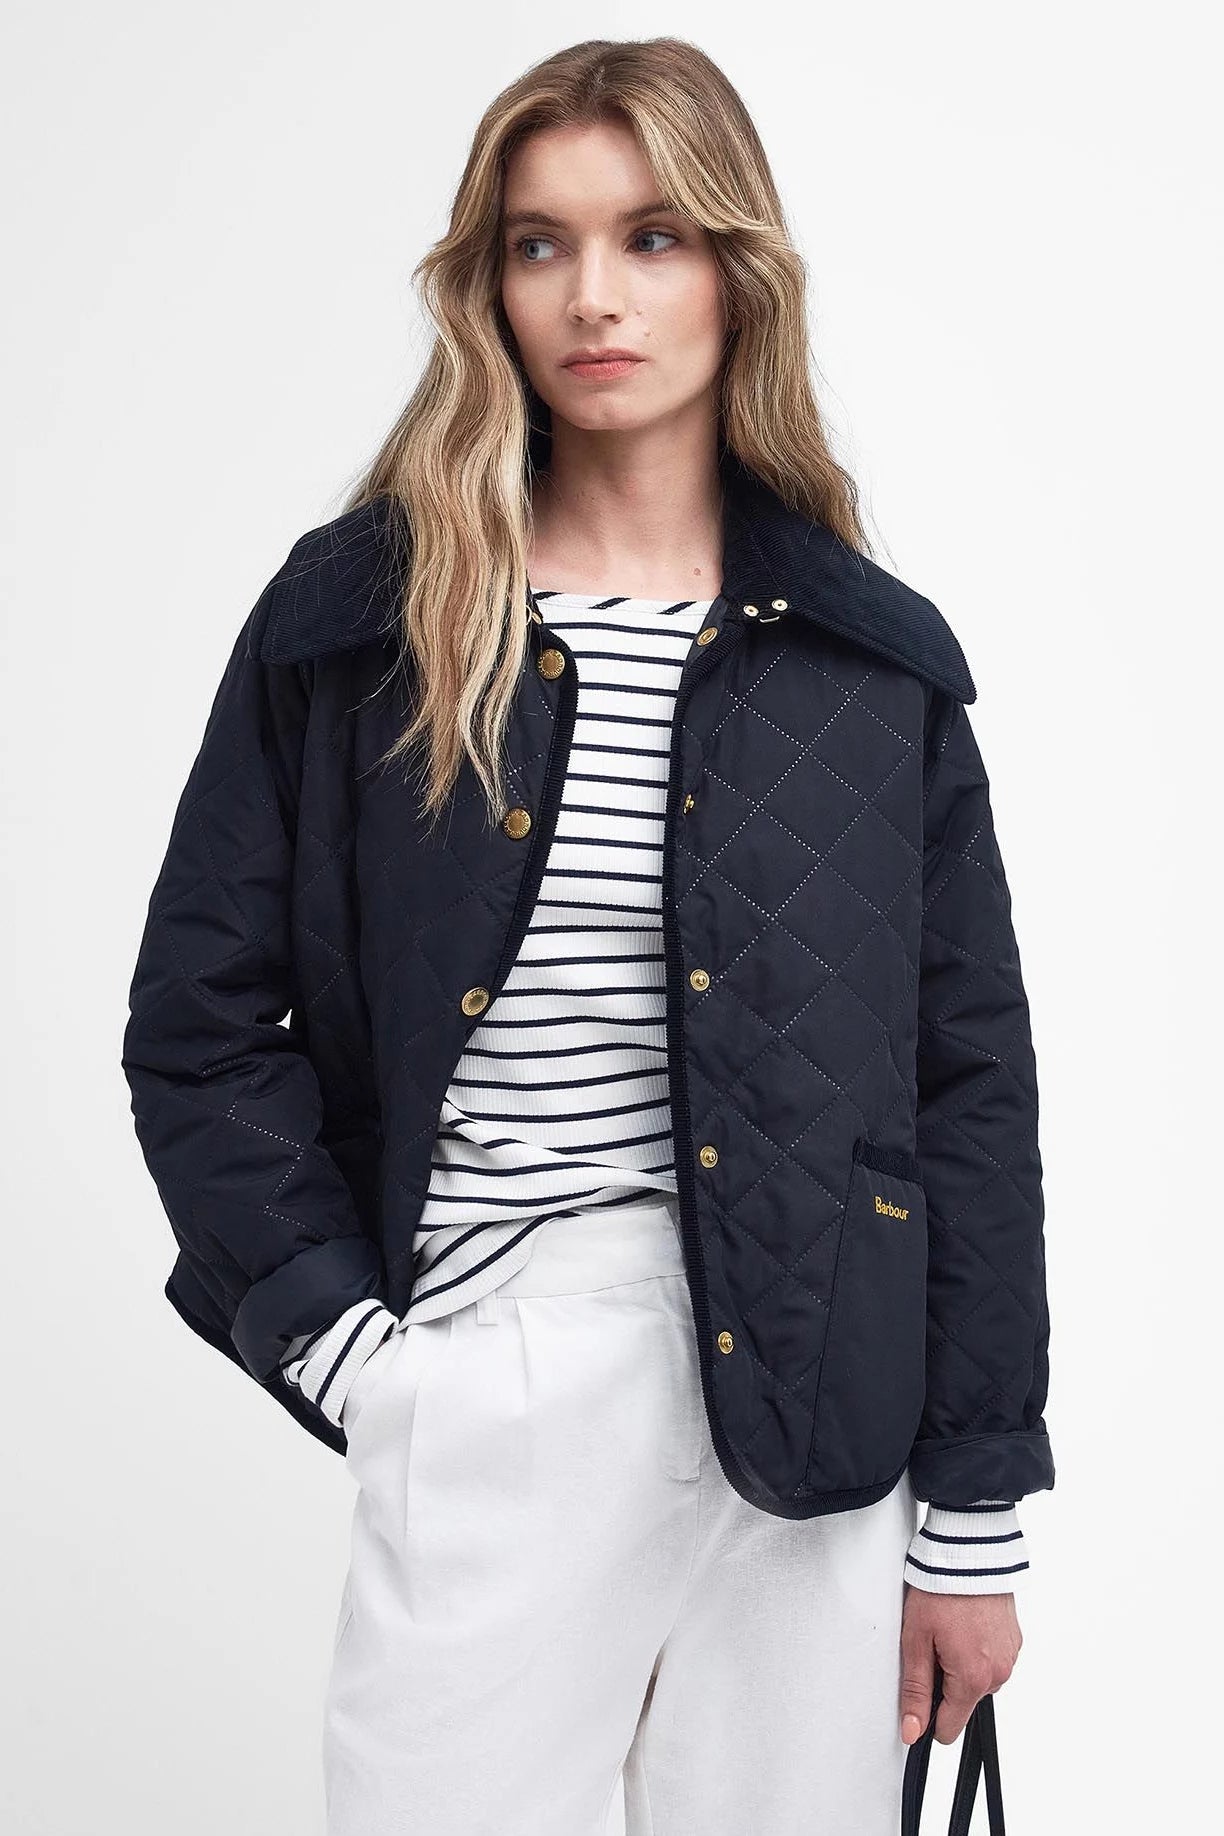 Gosford Quilted Jacket Jackets & Coats Barbour   